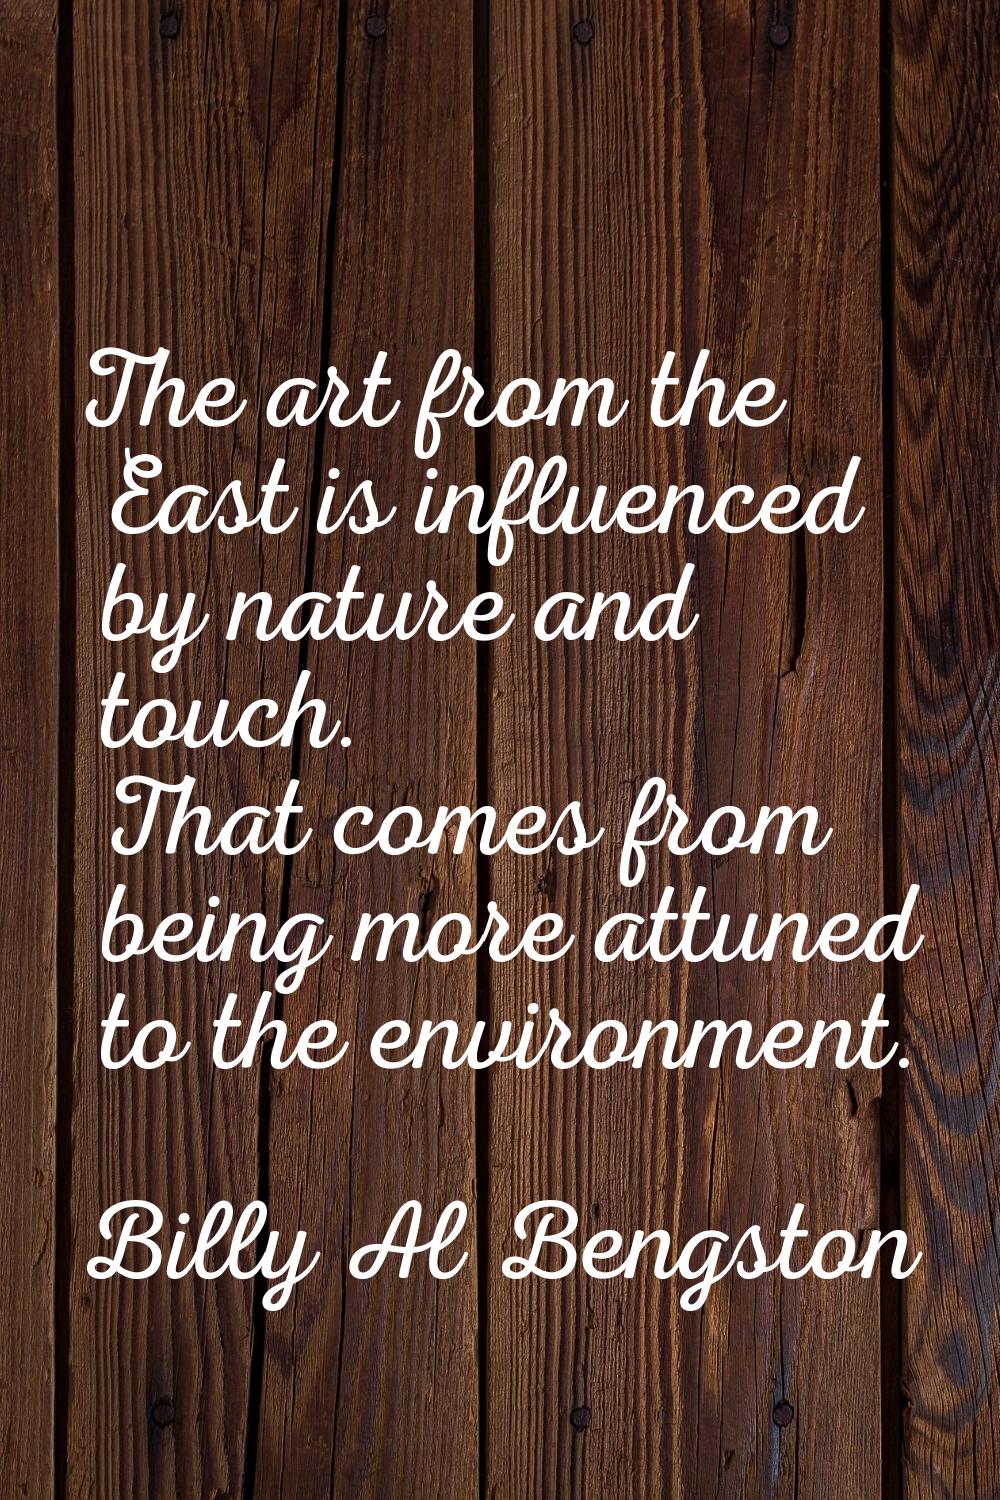 The art from the East is influenced by nature and touch. That comes from being more attuned to the 